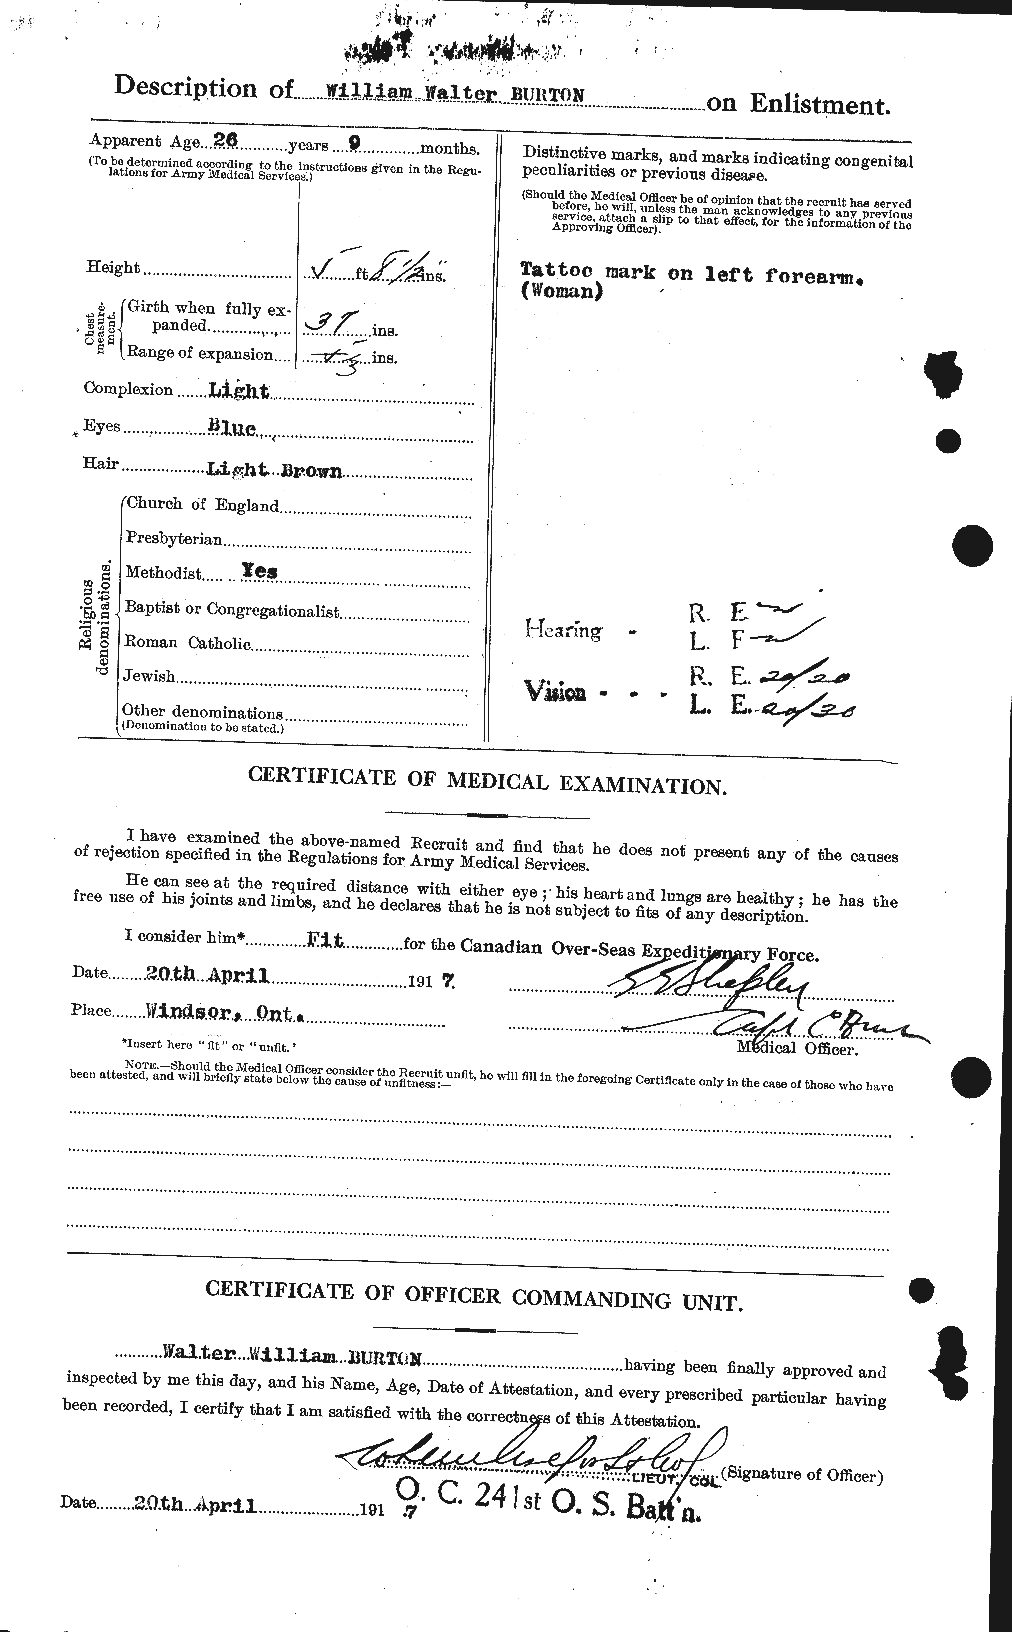 Personnel Records of the First World War - CEF 272774b